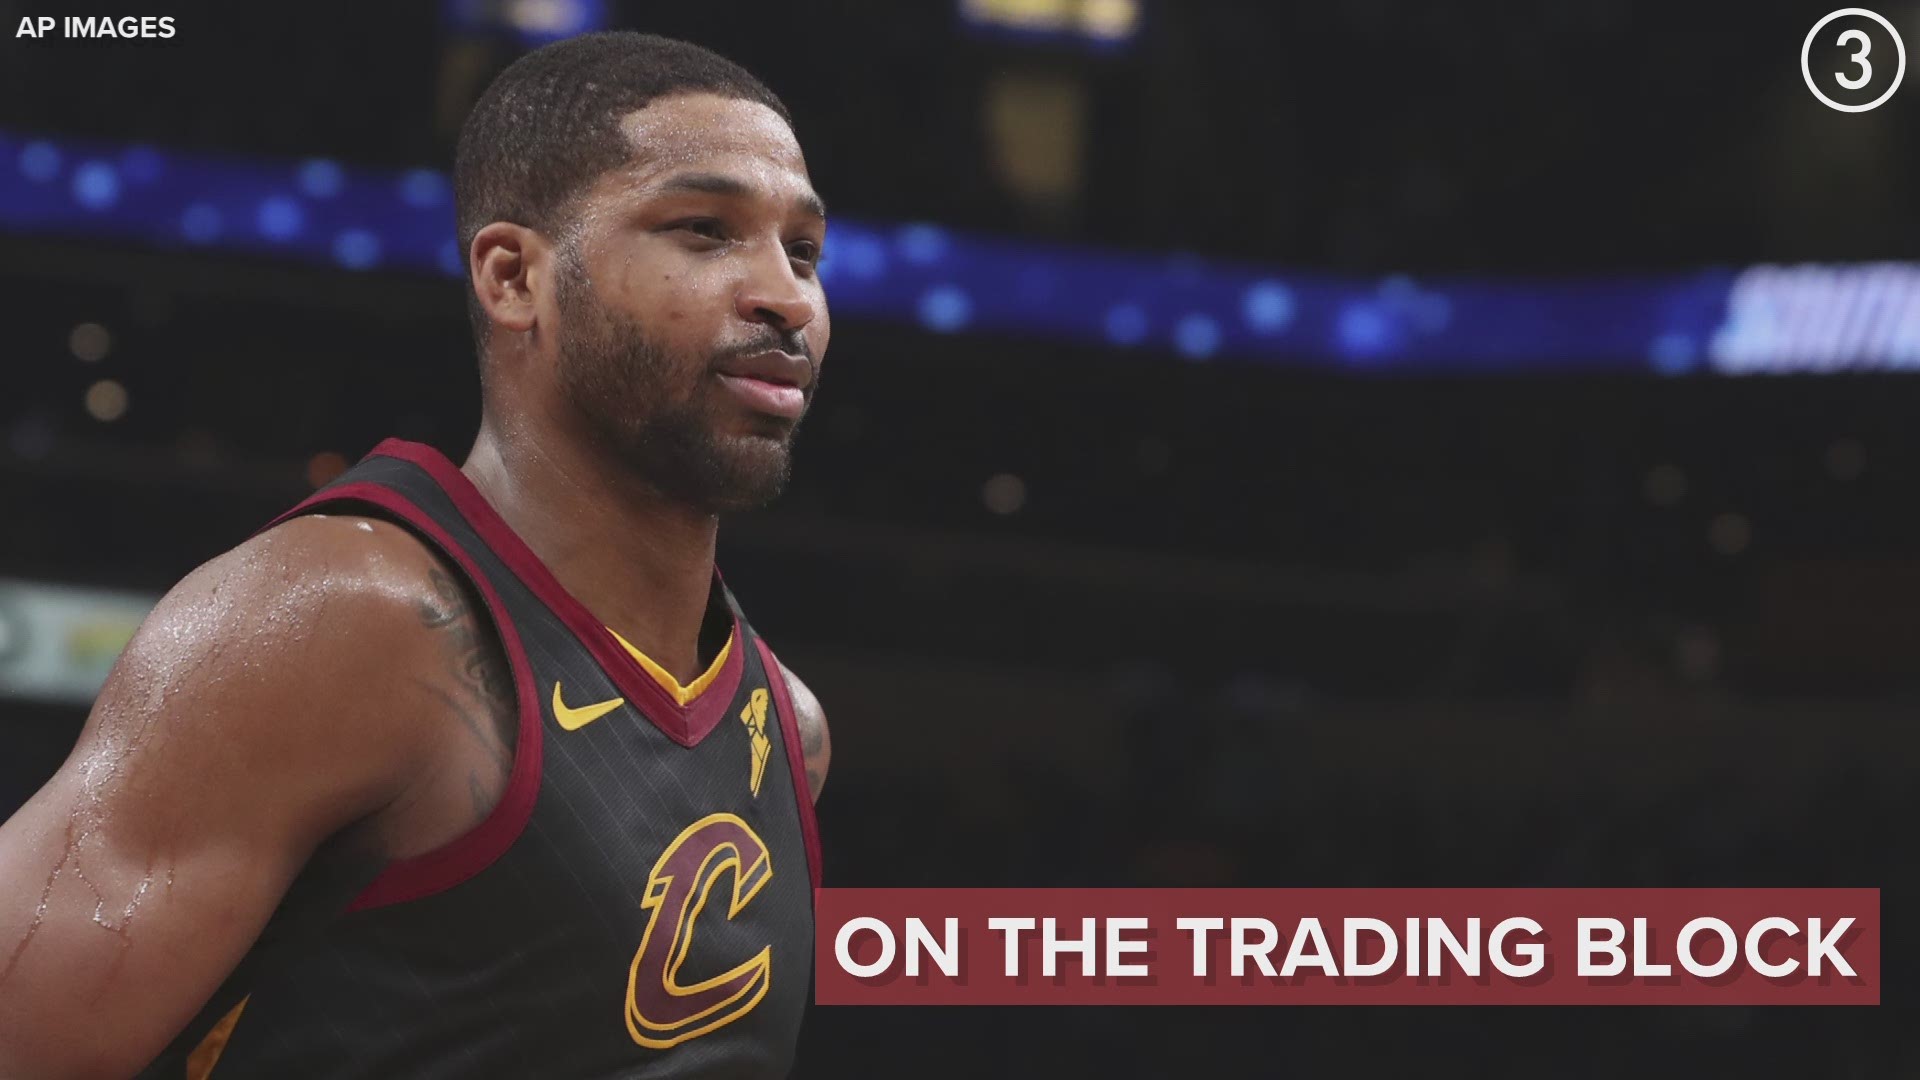 On the block? According to Chris Haynes of Yahoo Sports, the Cleveland Cavaliers have made Tristan Thompson available in trade talks ahead of the NBA trade deadline.